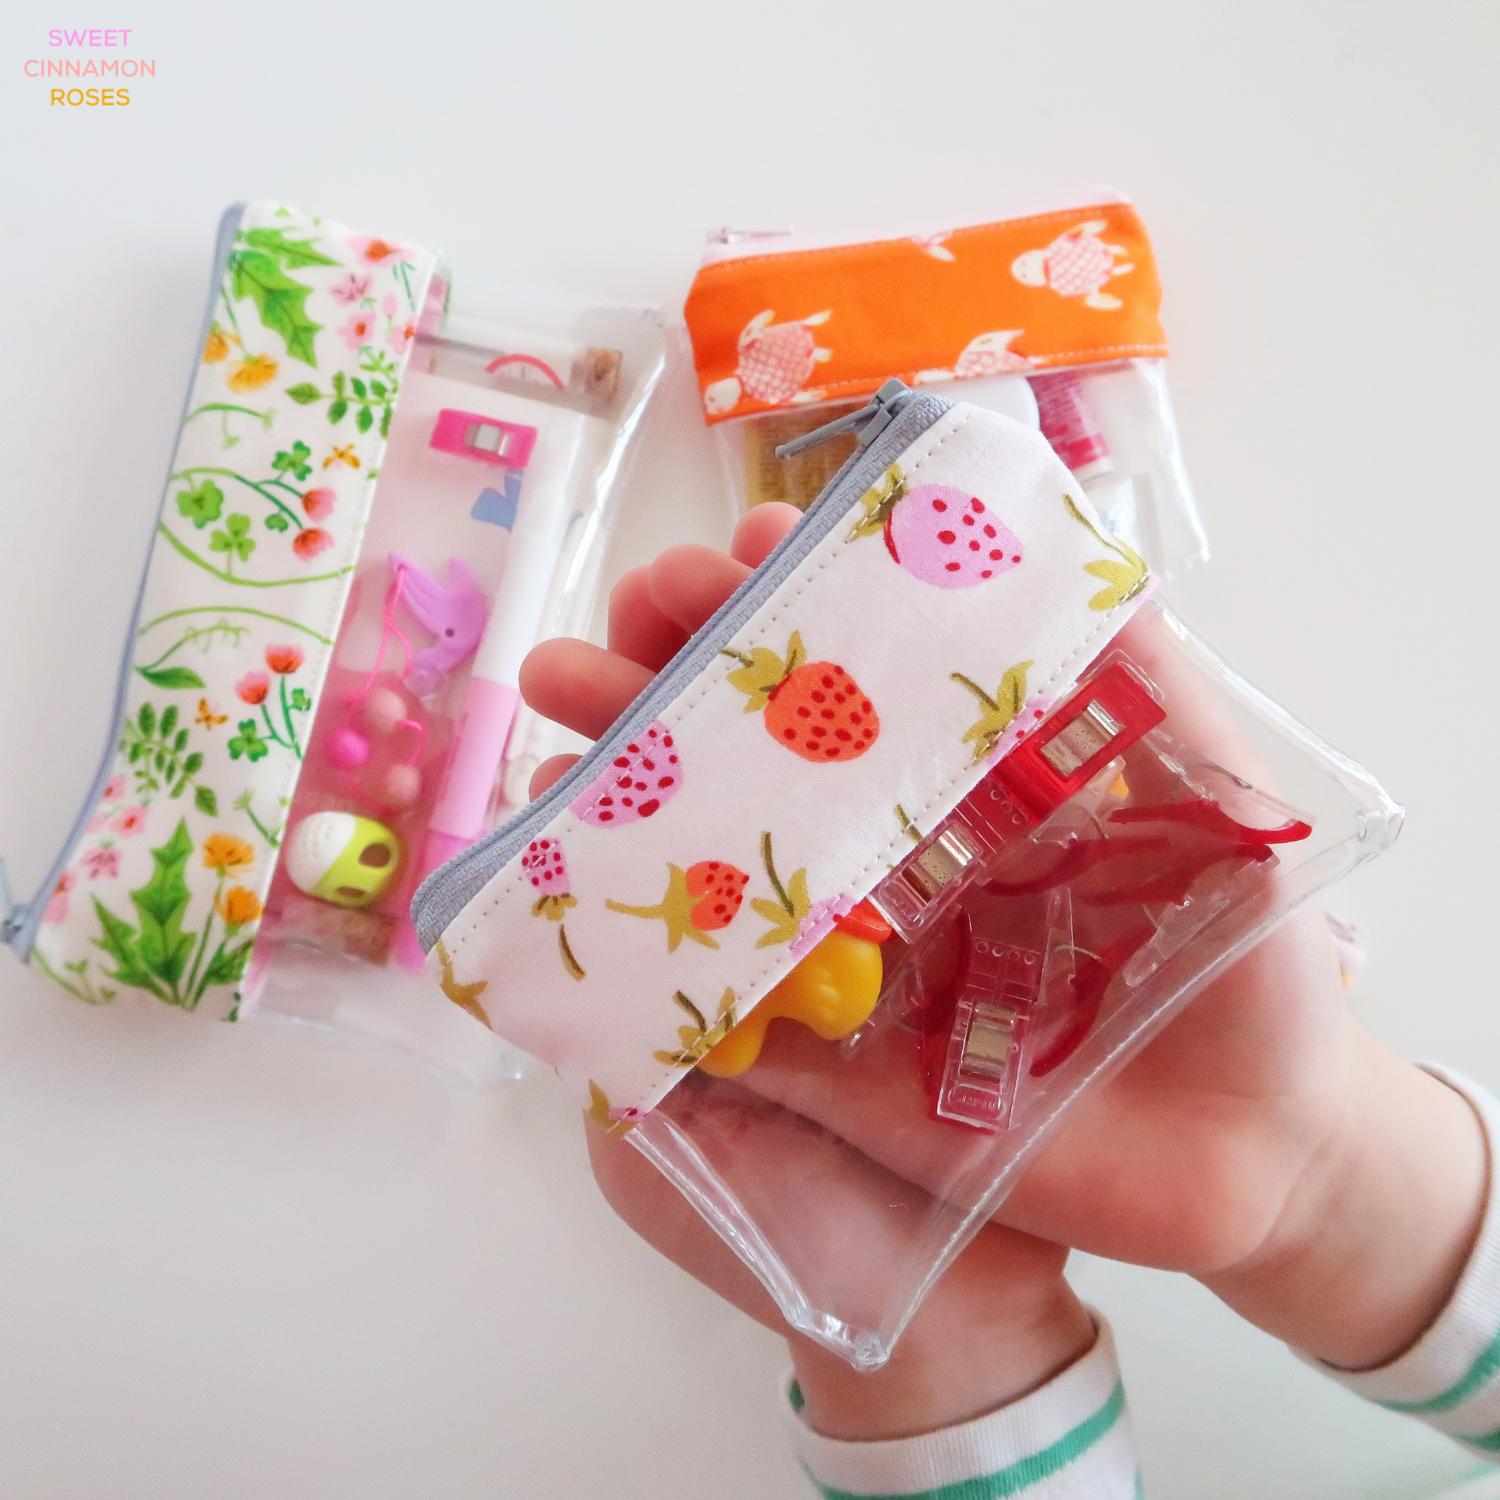 Clear Boxy Pouch - sewing pattern – sweetcinnamonroses